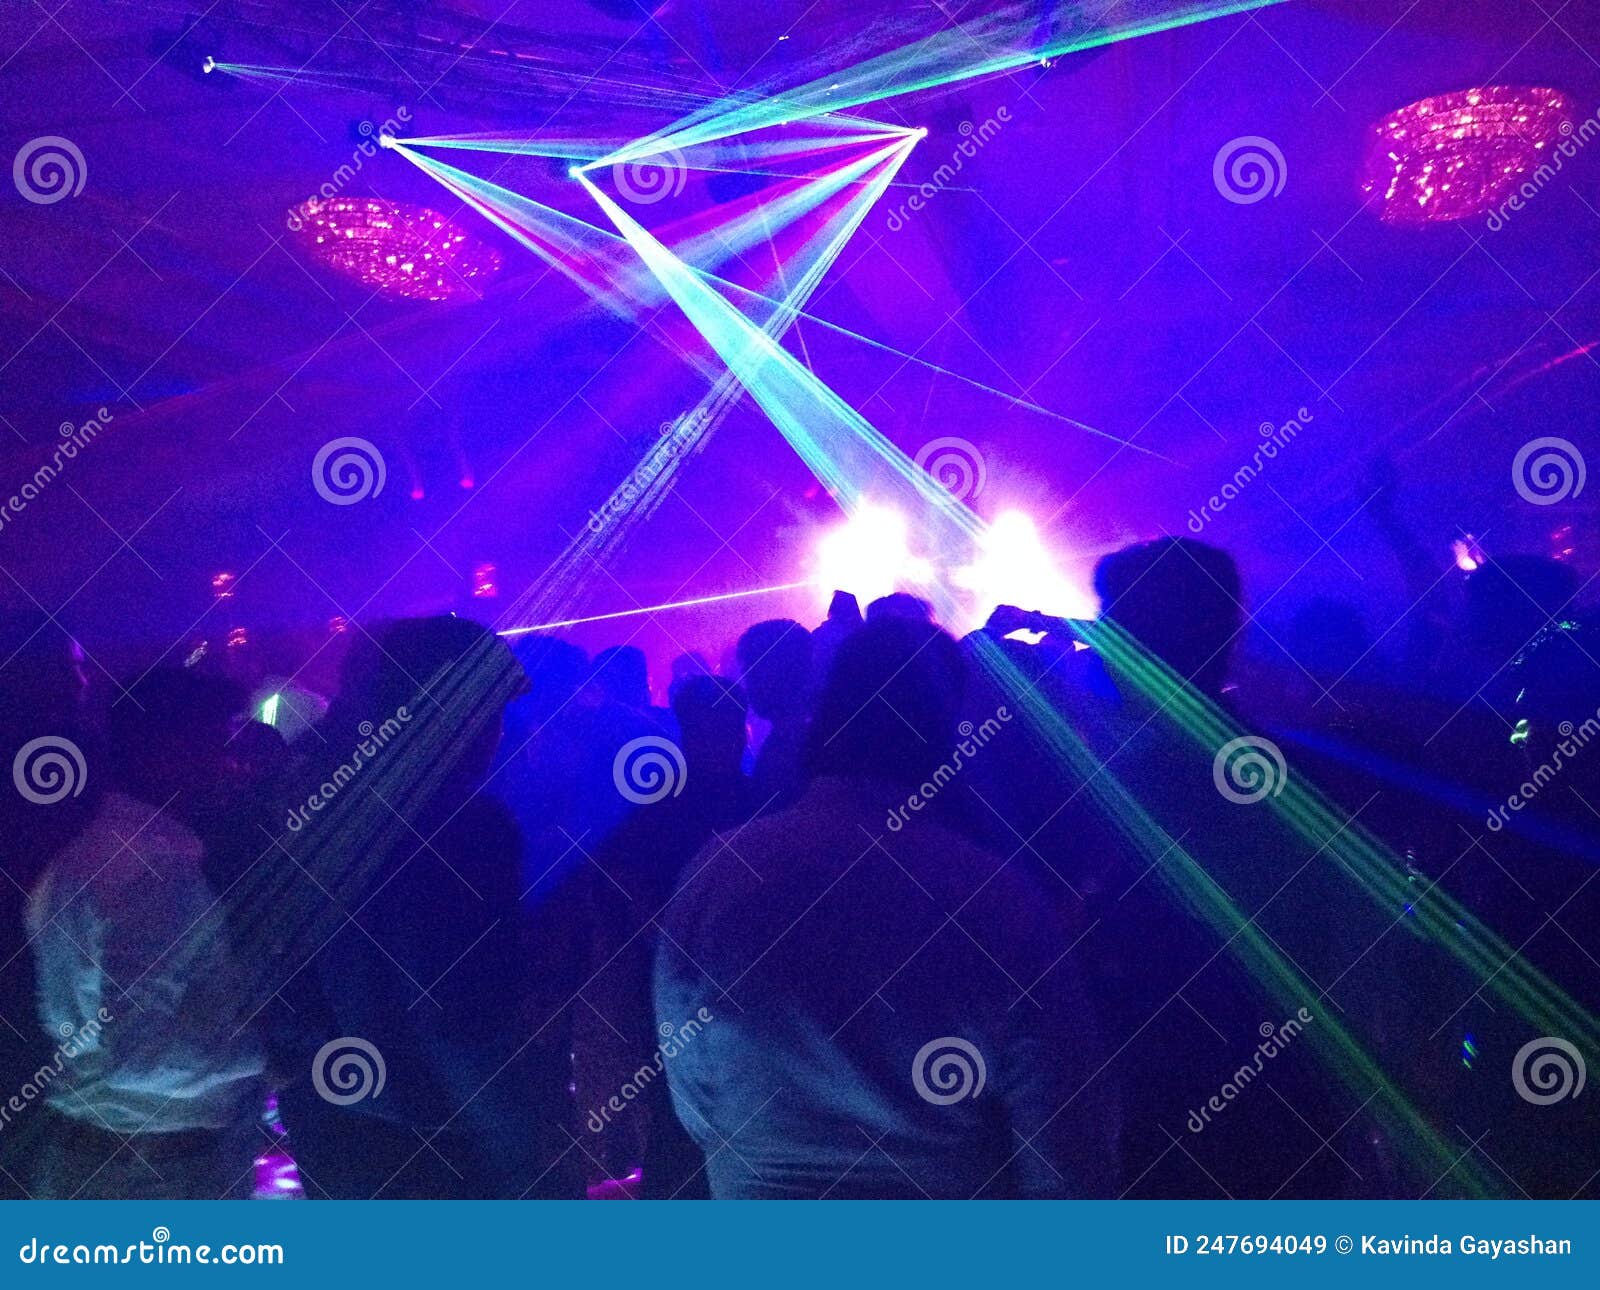 Indoor DJ Party Celebration with Disco Lights Stock Image - Image of ...